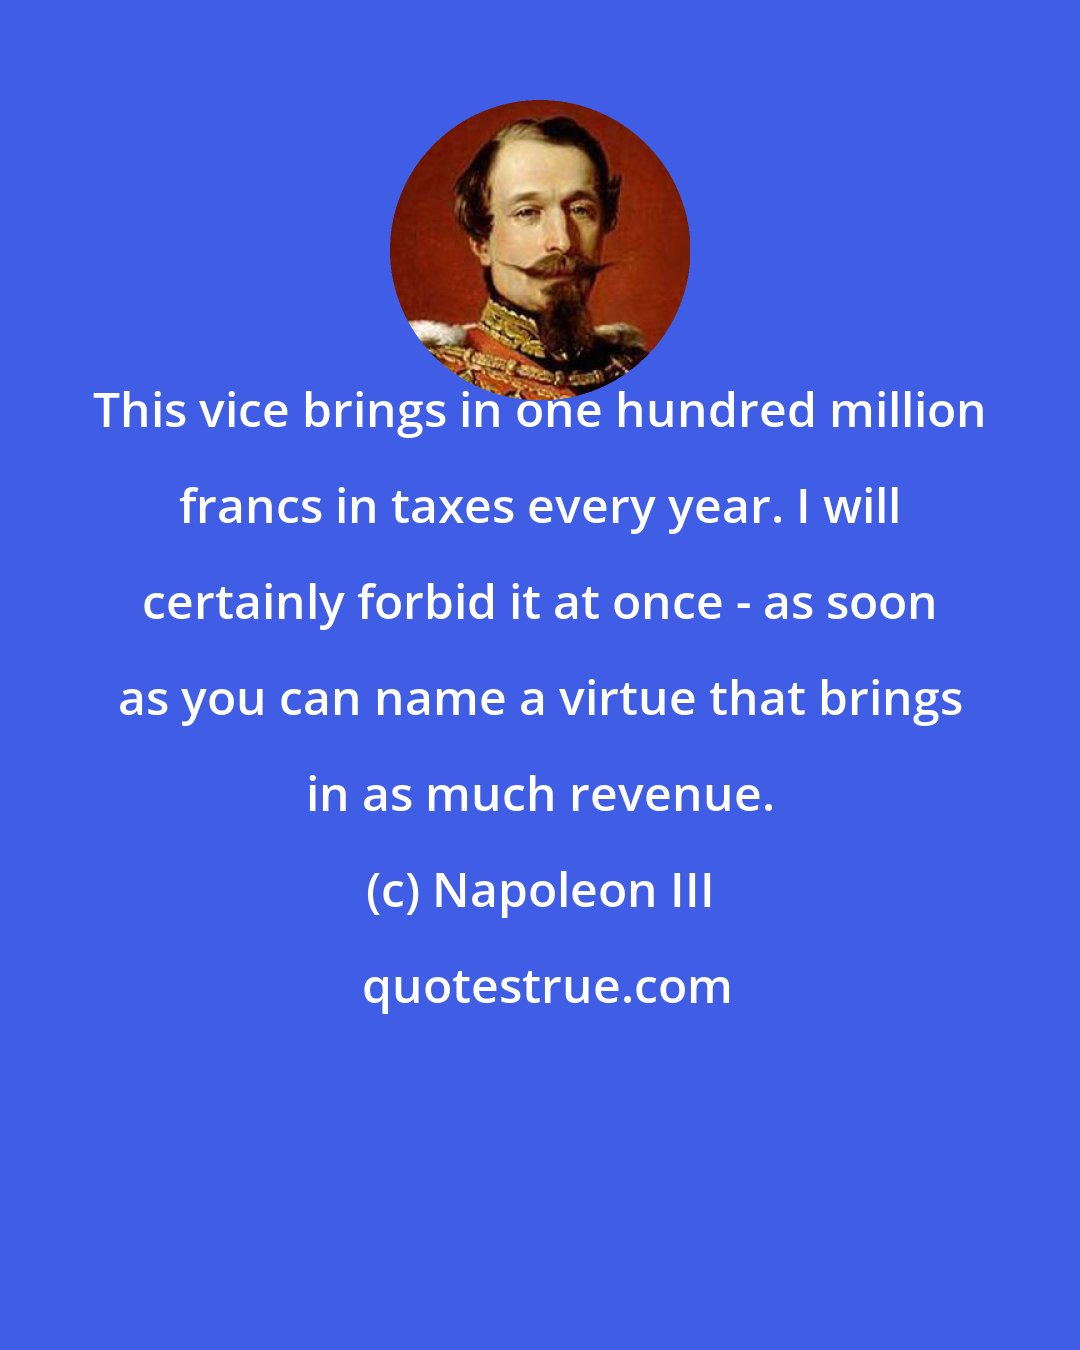 Napoleon III: This vice brings in one hundred million francs in taxes every year. I will certainly forbid it at once - as soon as you can name a virtue that brings in as much revenue.